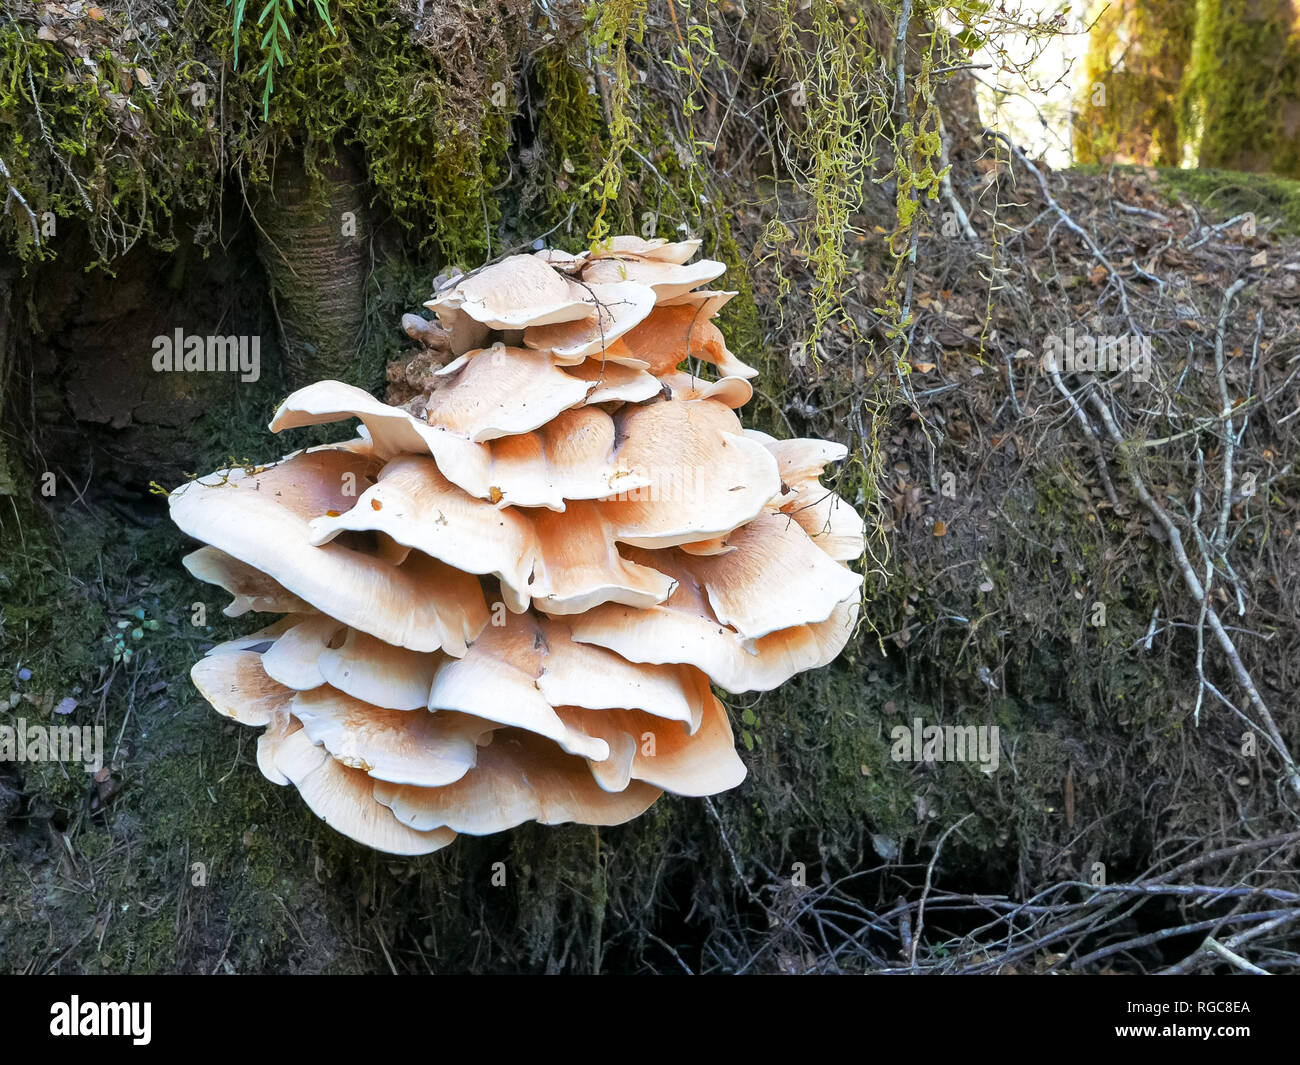 close up of an unusual large fungi growing on a tree trunk in a rain forest in new zealand Stock Photo